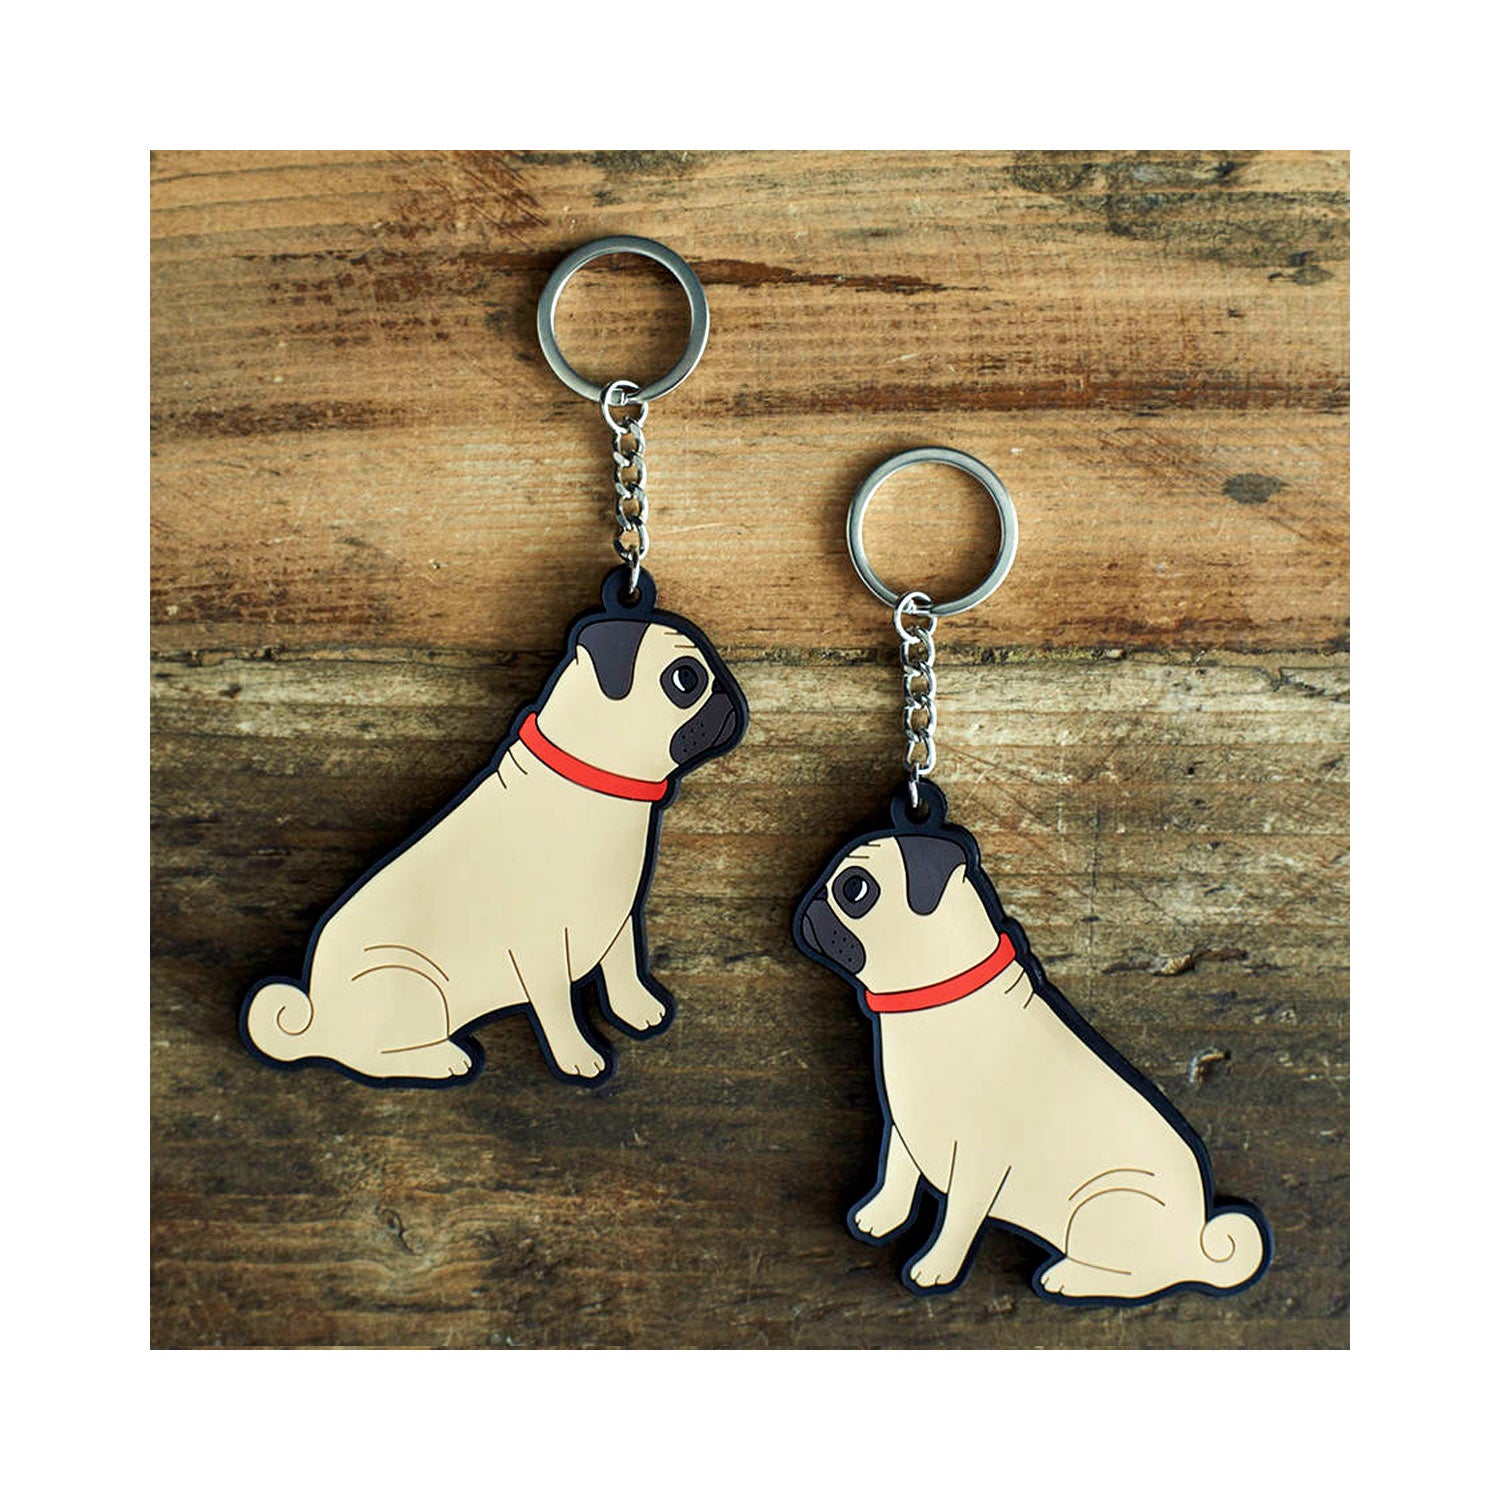 Dog Lover Gifts available at Dog Krazy Gifts - Winston The Fawn Pug Keyring - part of the Sweet William range available from Dog Krazy Gifts